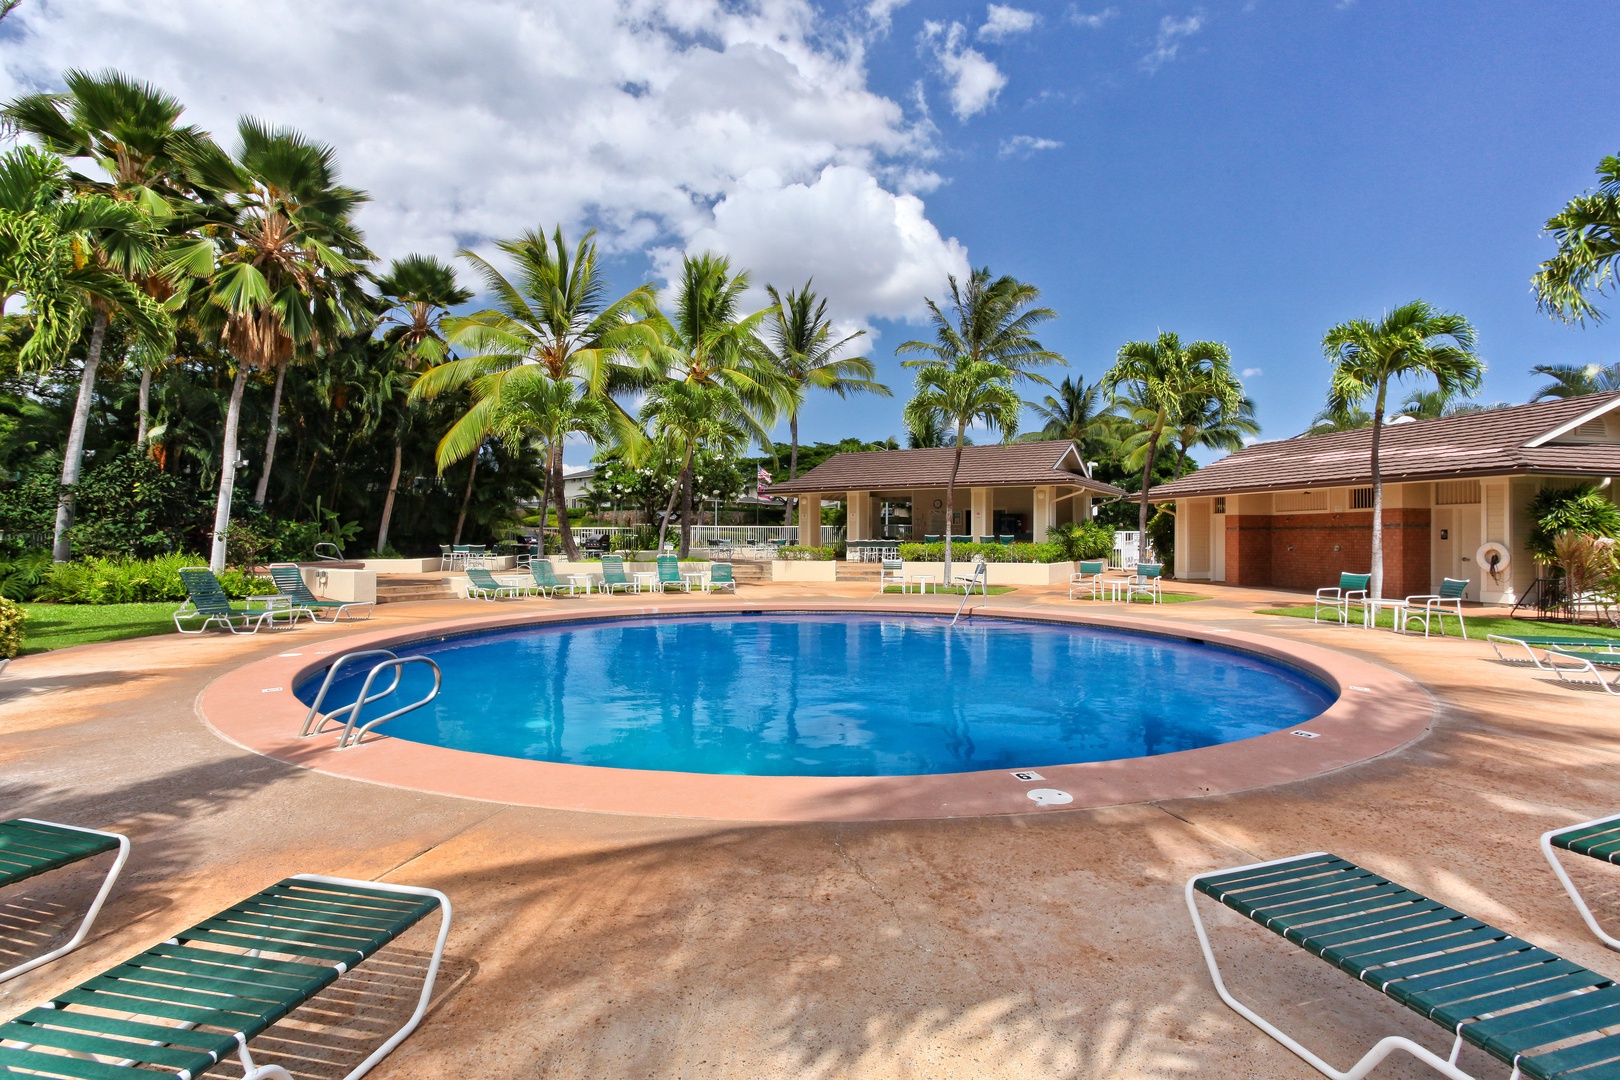 Kapolei Vacation Rentals, Fairways at Ko Olina 27H - Go for a swim in the sparkling waters and rest in the lounge chairs.